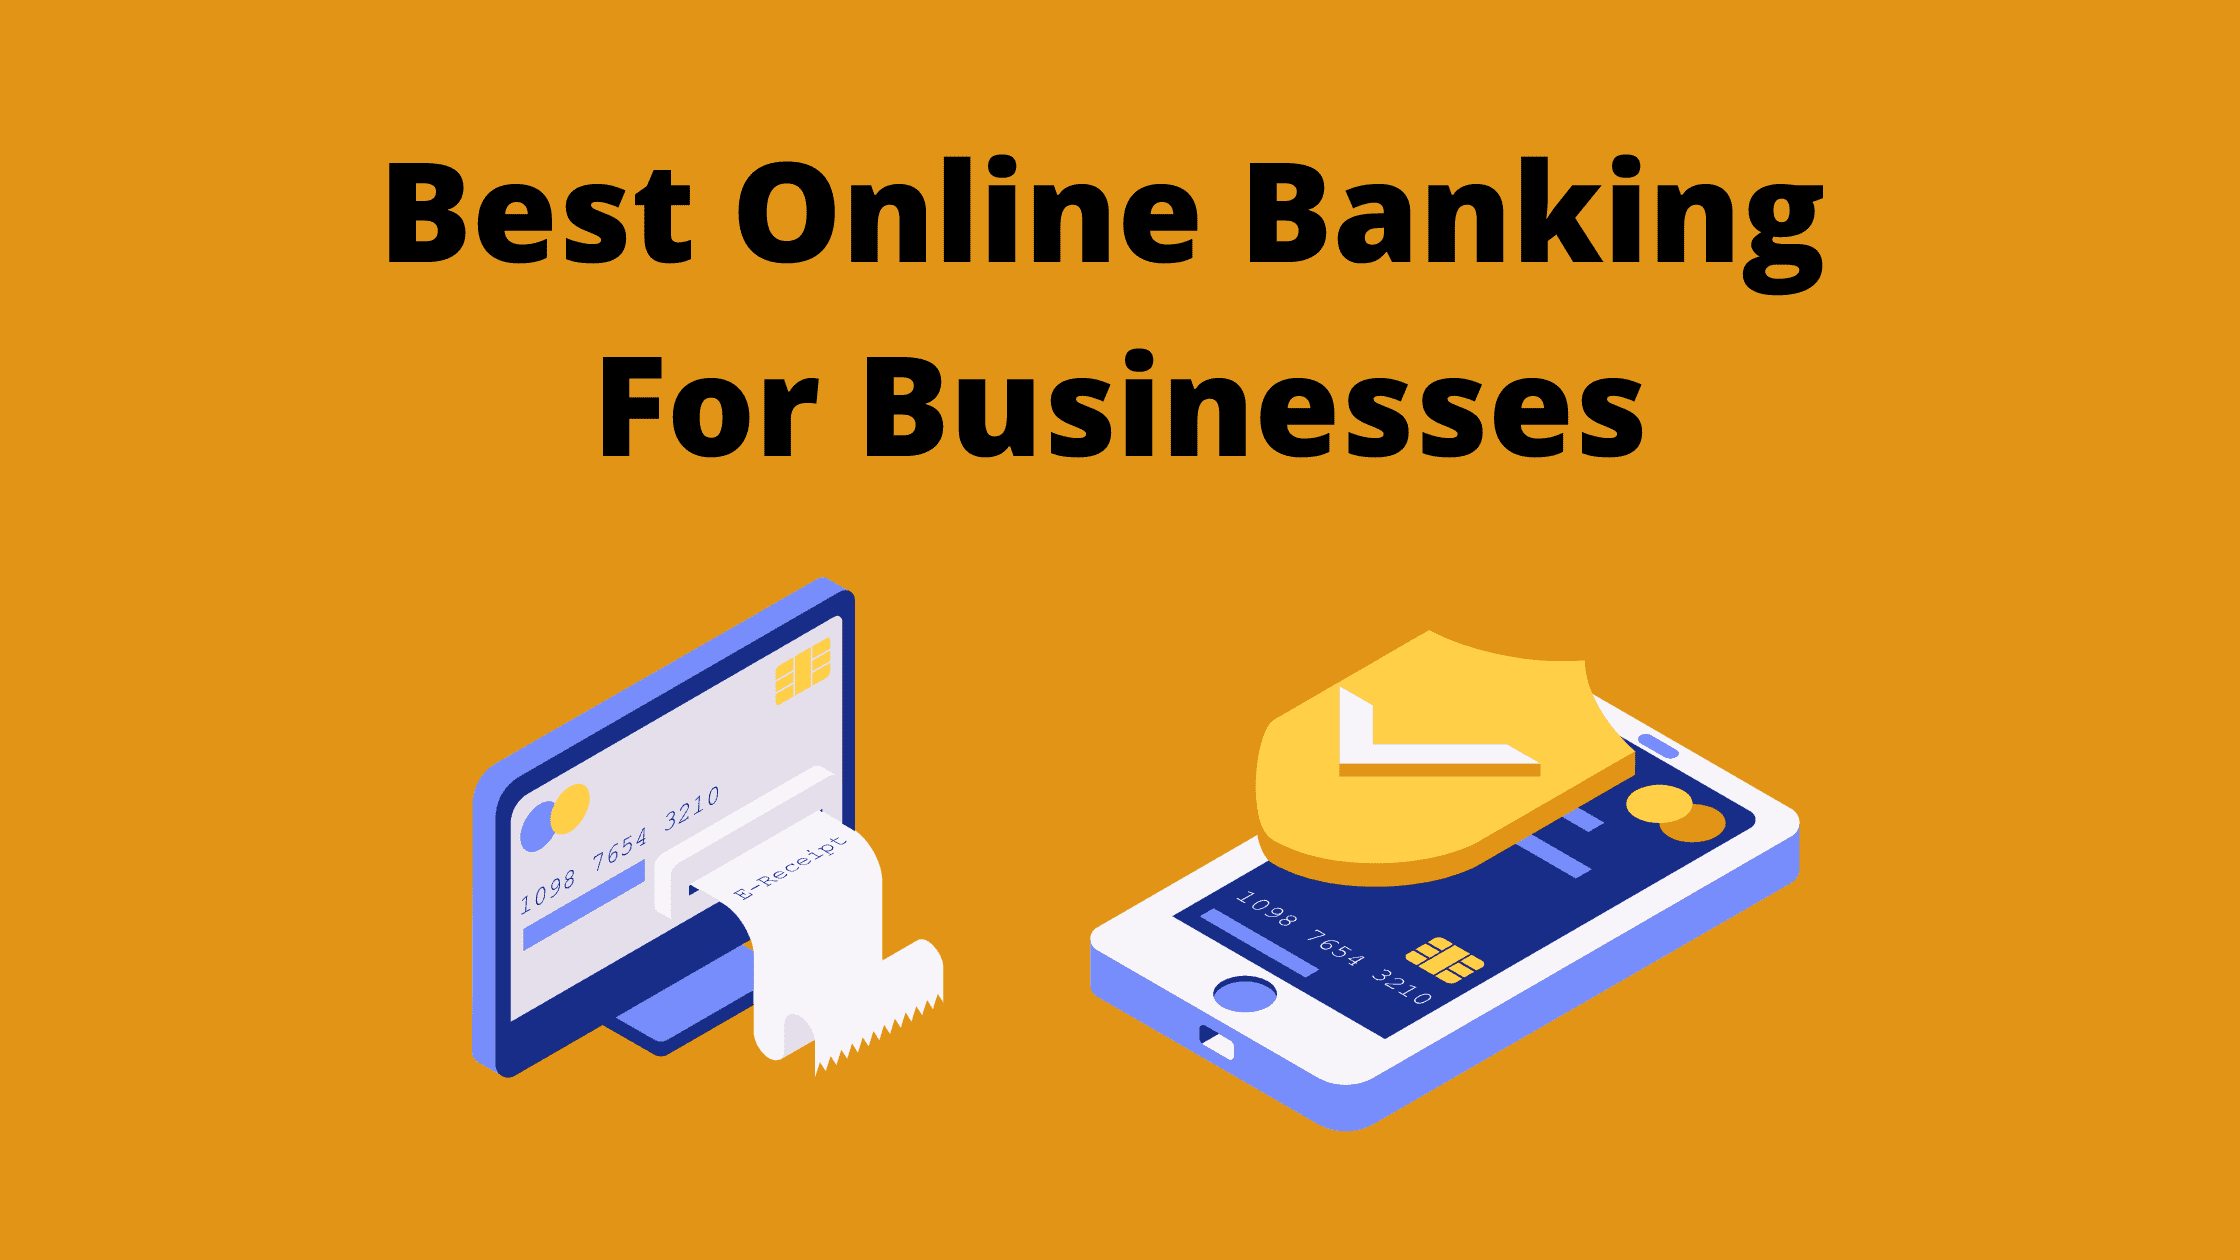 Best Online Banking For Businesses